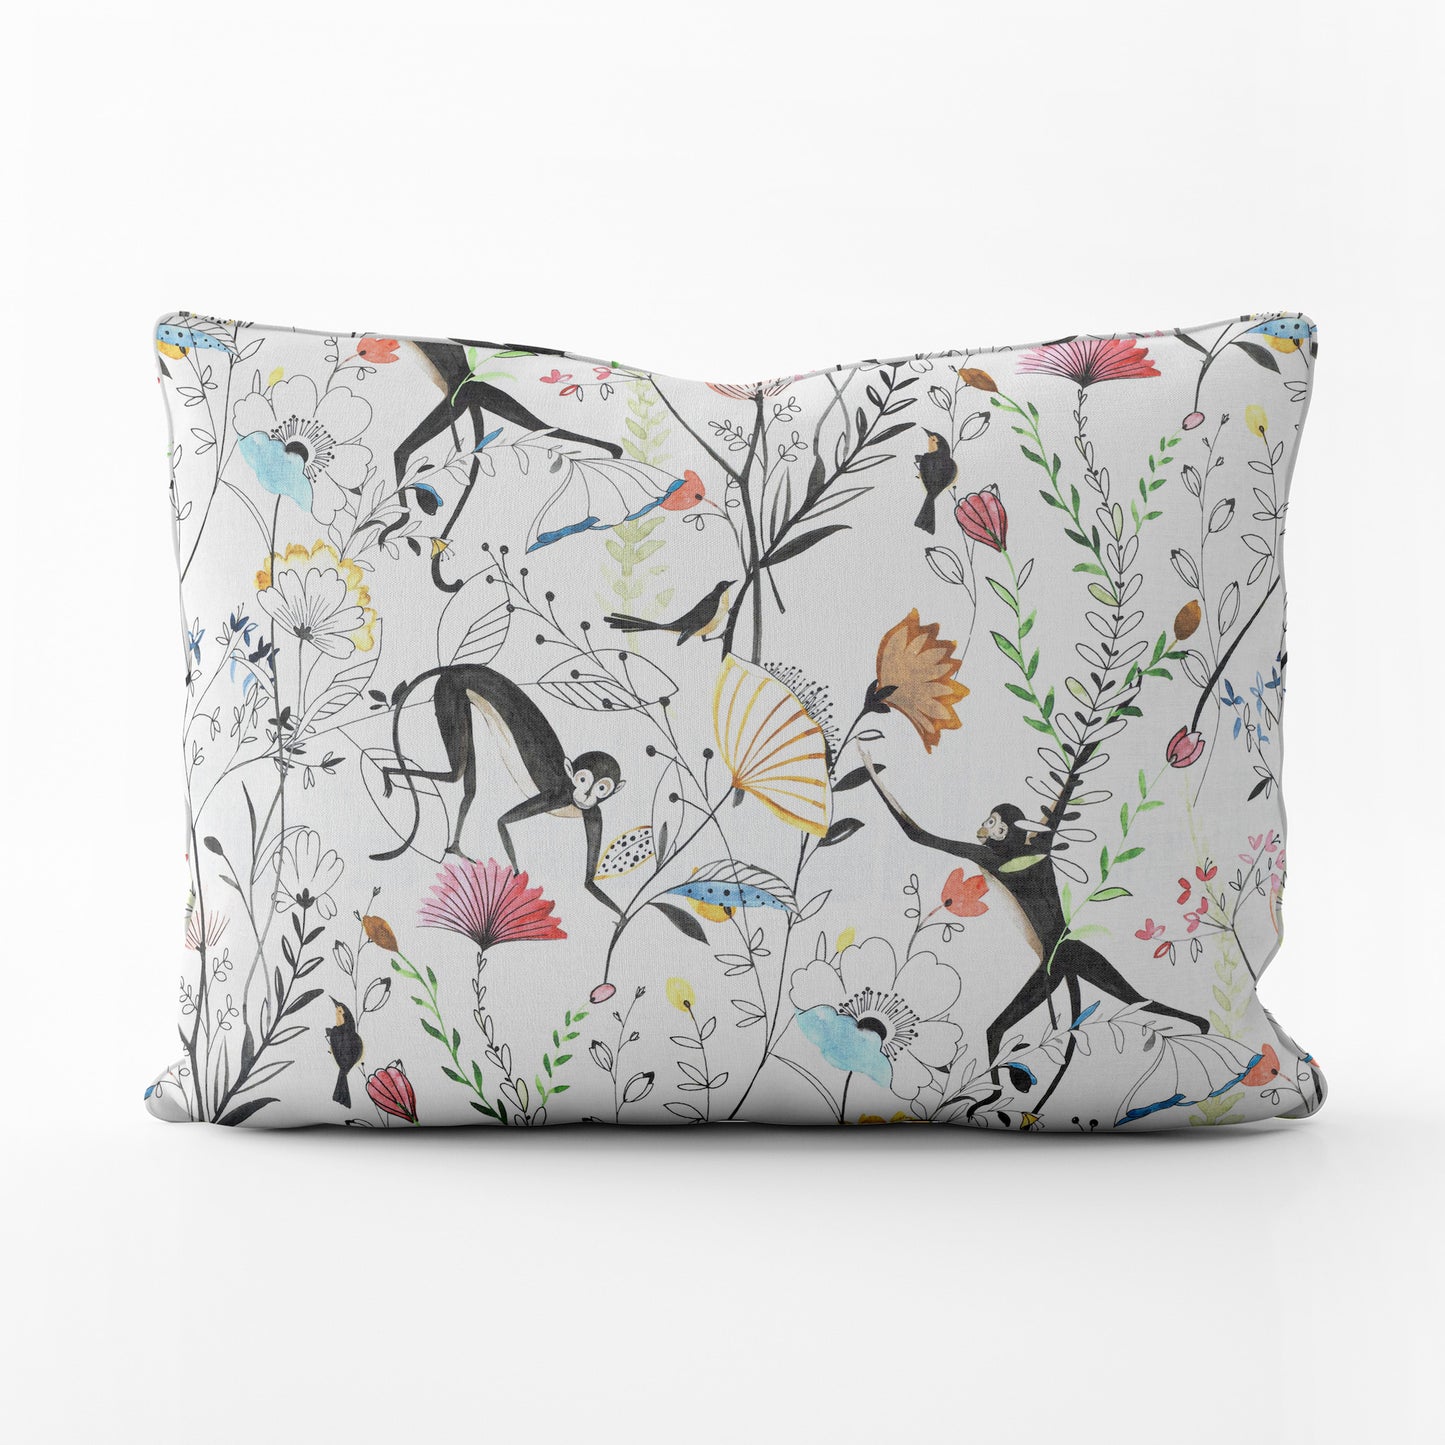 Decorative Pillows in Entangled, a Monkey & Bird Watercolor Floral Jungle